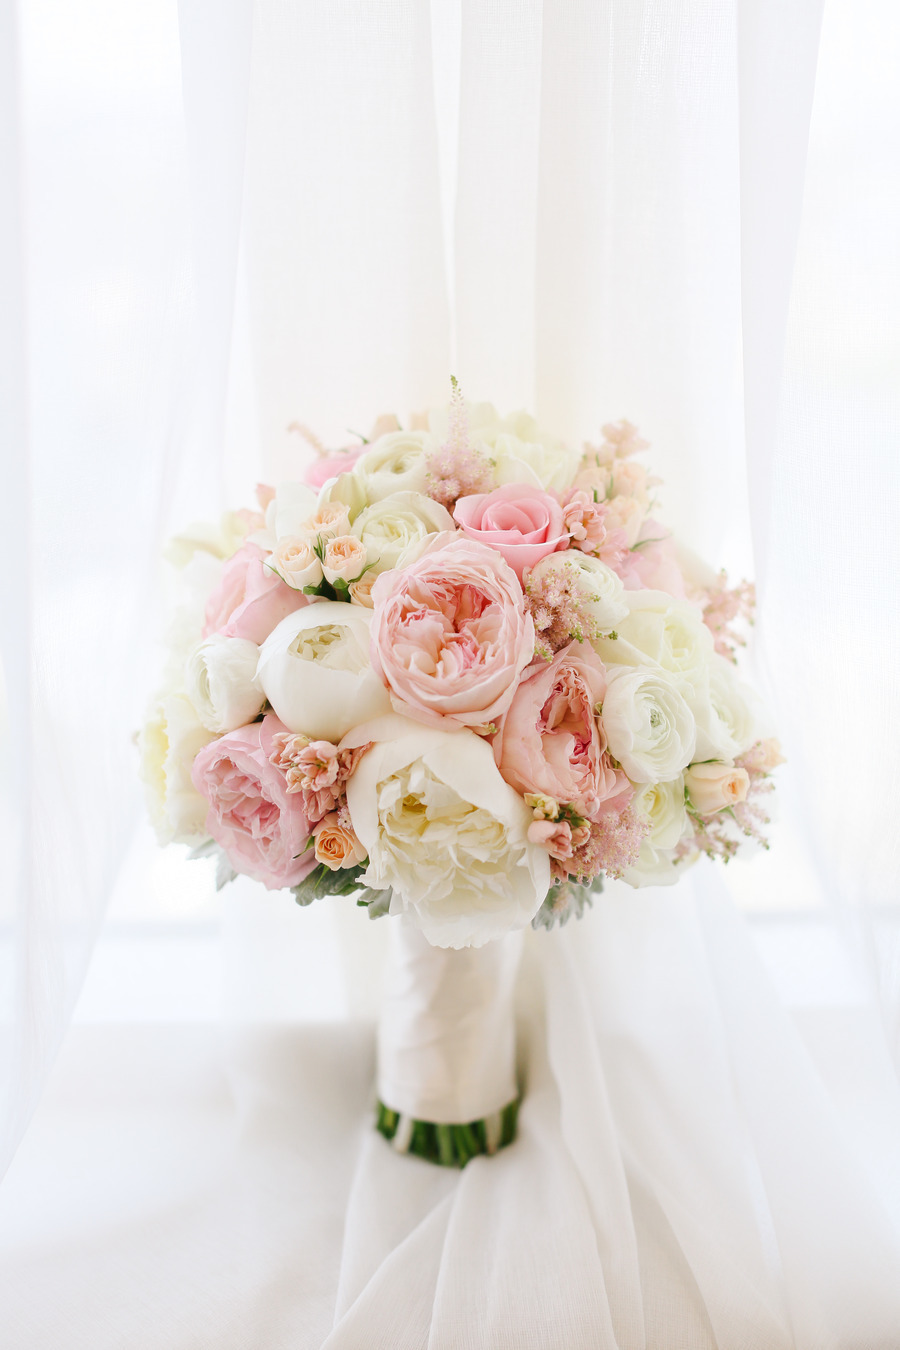 Peony Wedding Bouquet | She's Intentional: The Dainty Jewell's Blog